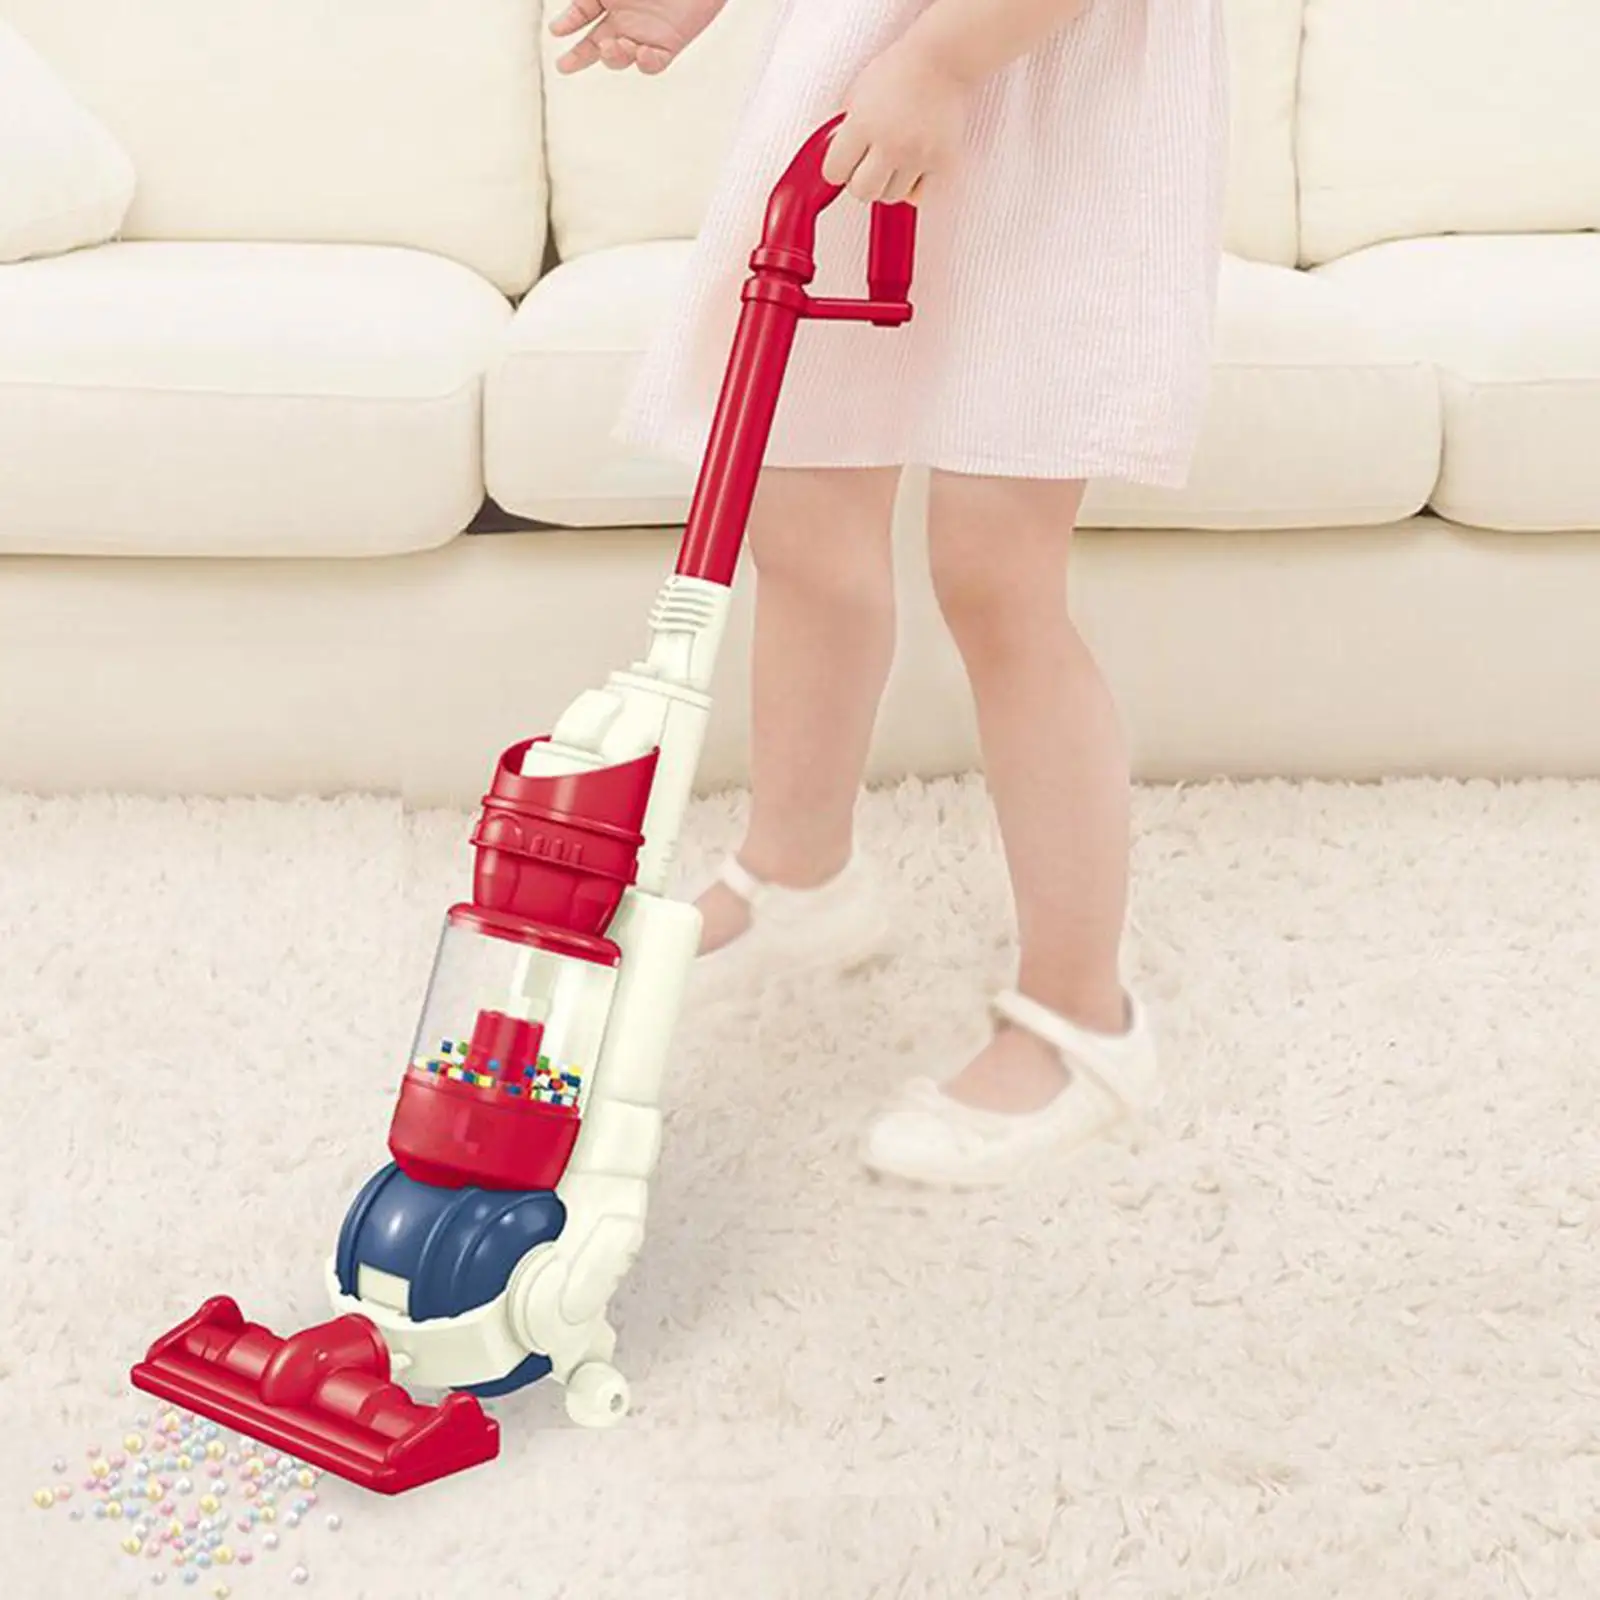 Kids Vacuum Cleaner Toy Role Play Girls Boys Cleaner Toy Aged 4+